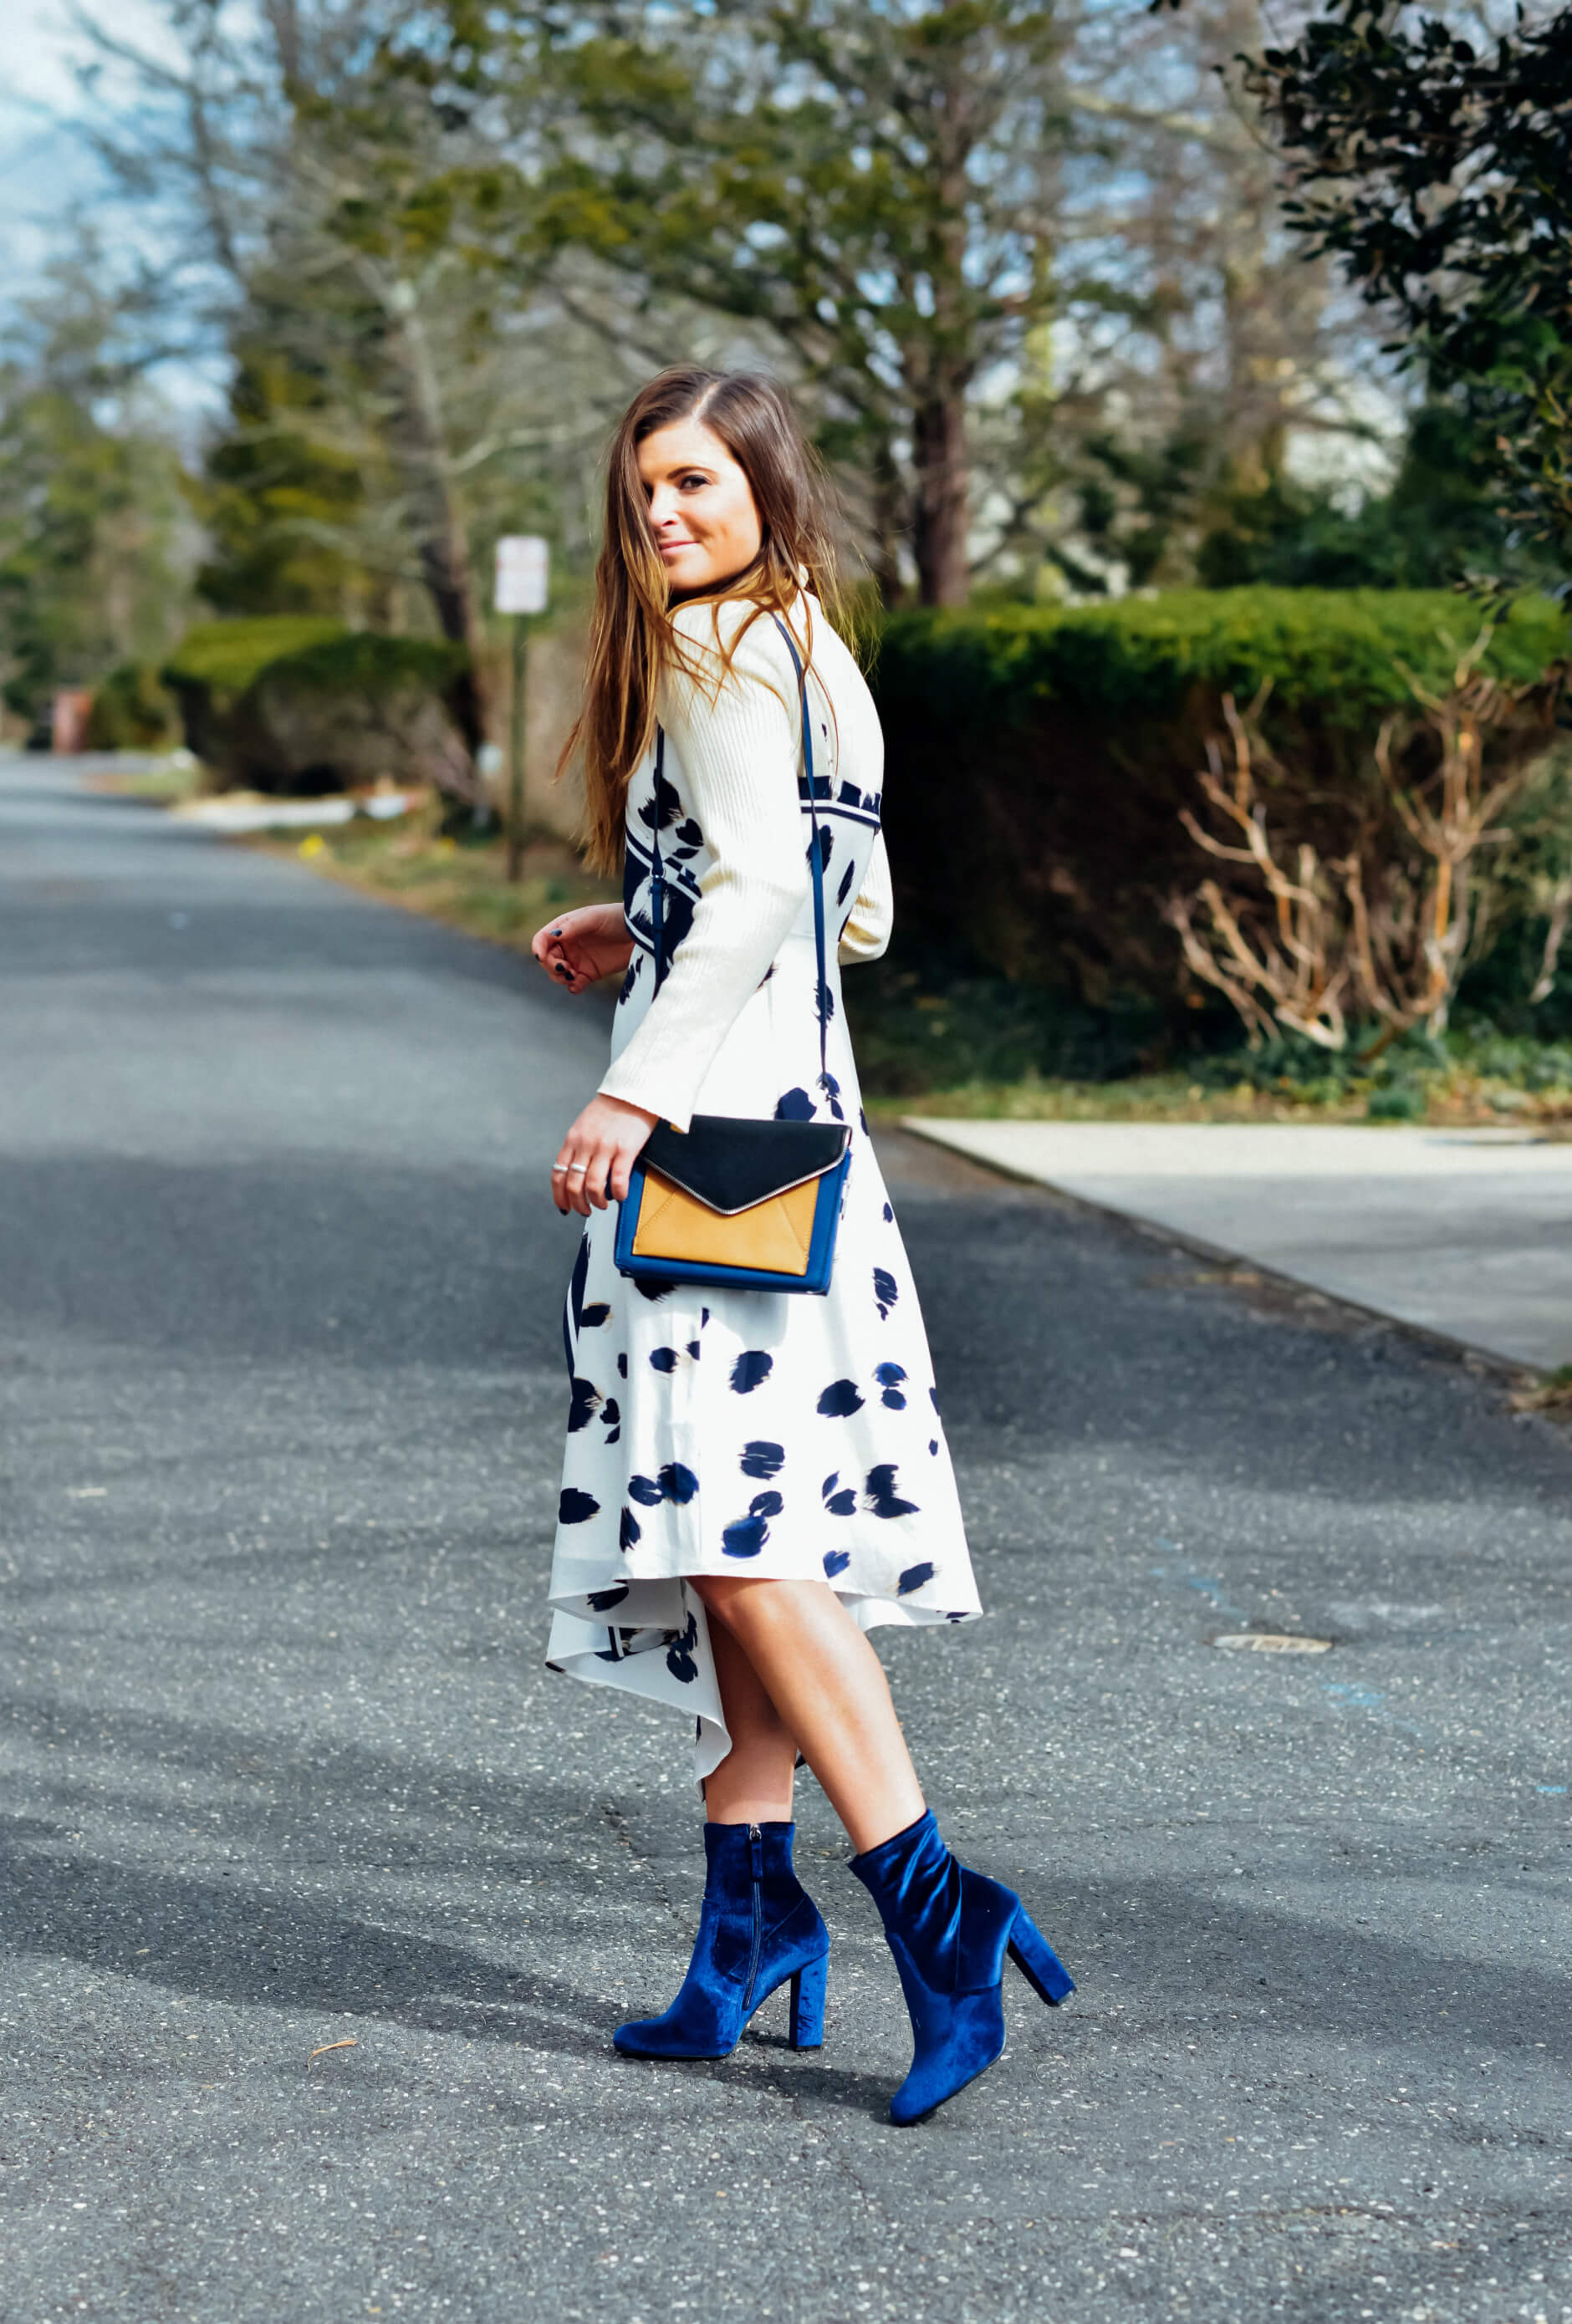 Banana Republic Dress, GANT Turtleneck, Rebecca Minkoff Bag, Spring Layers, Outfit Inspiration, Tilden of To Be Bright